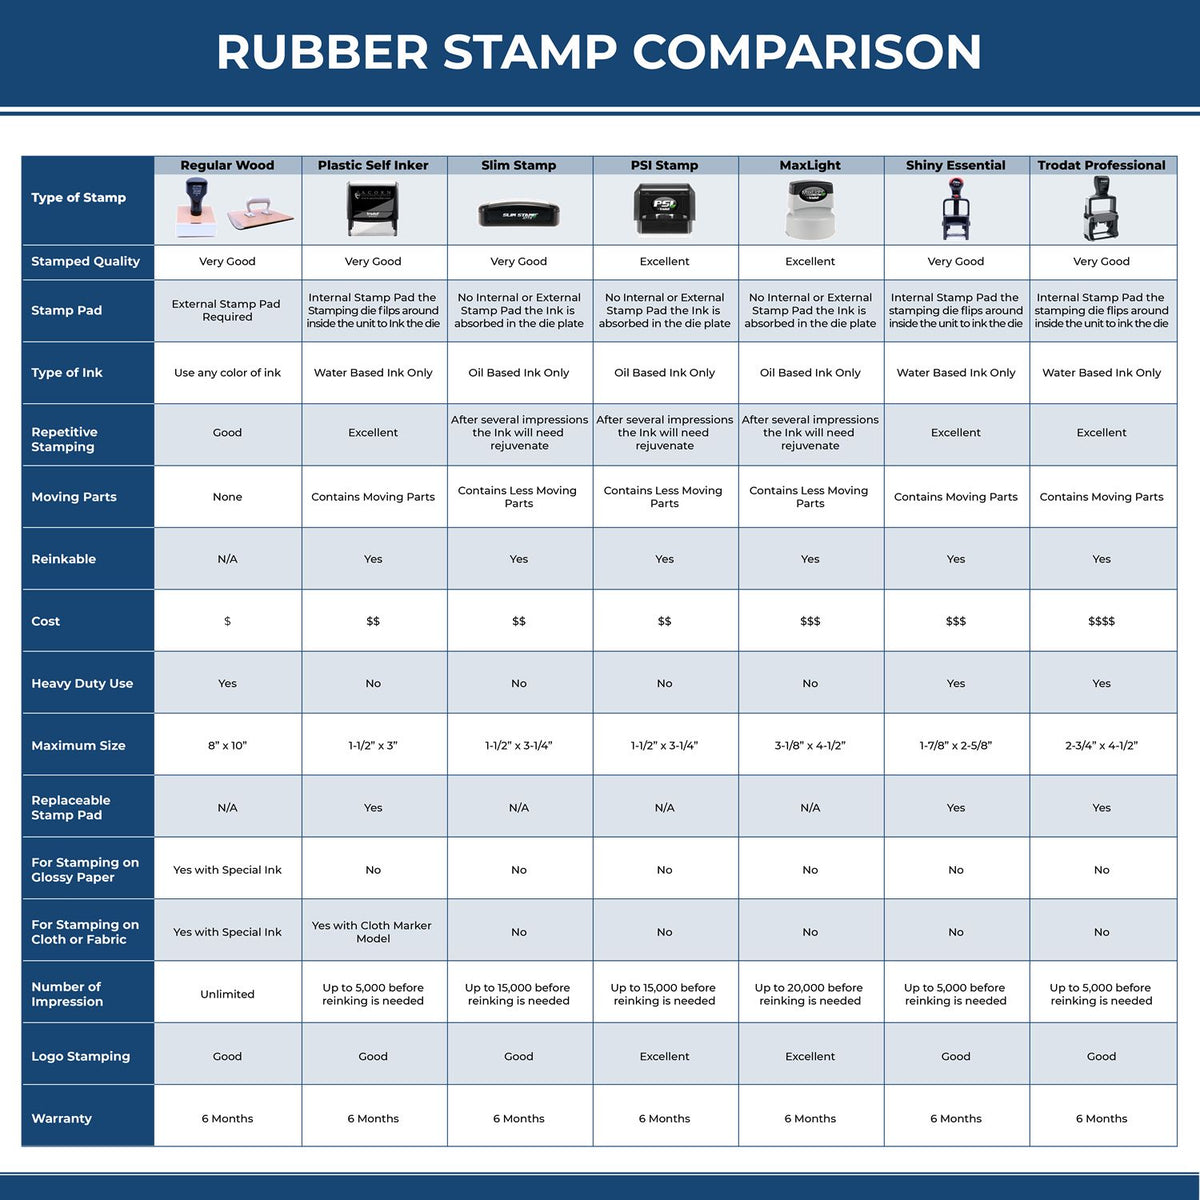 Large Pre-Inked Hooo does this belong to Stamp 5610SLIM Rubber Stamp Comparison